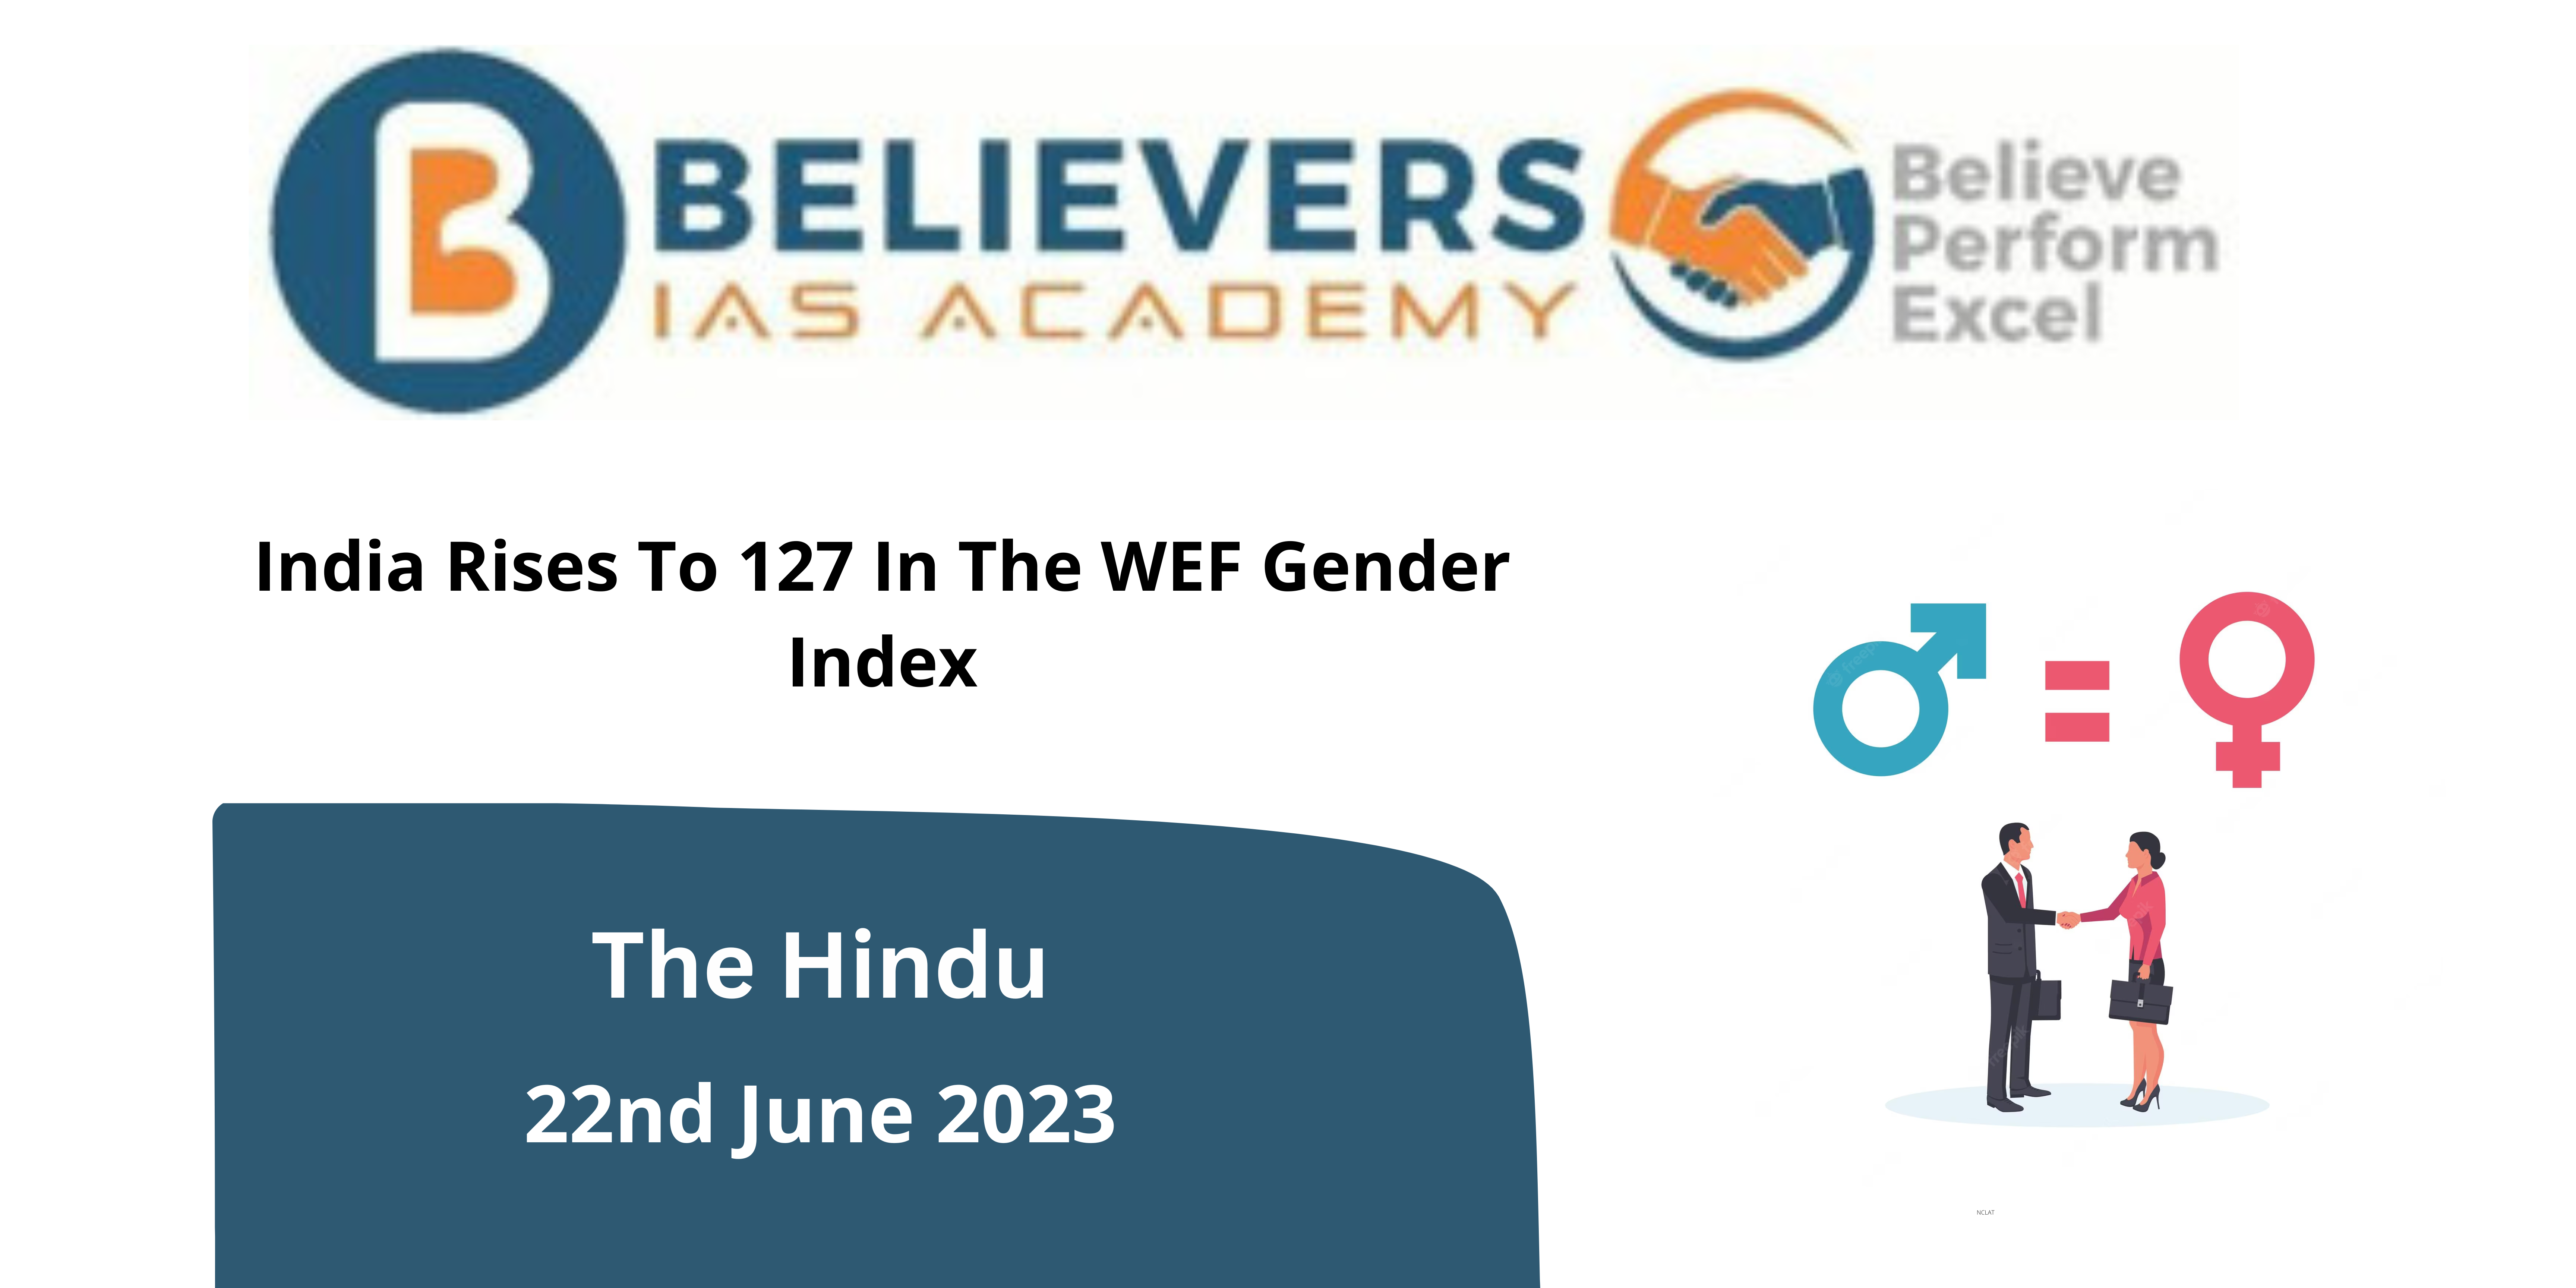 India Rises To 127 In The WEF Gender Index